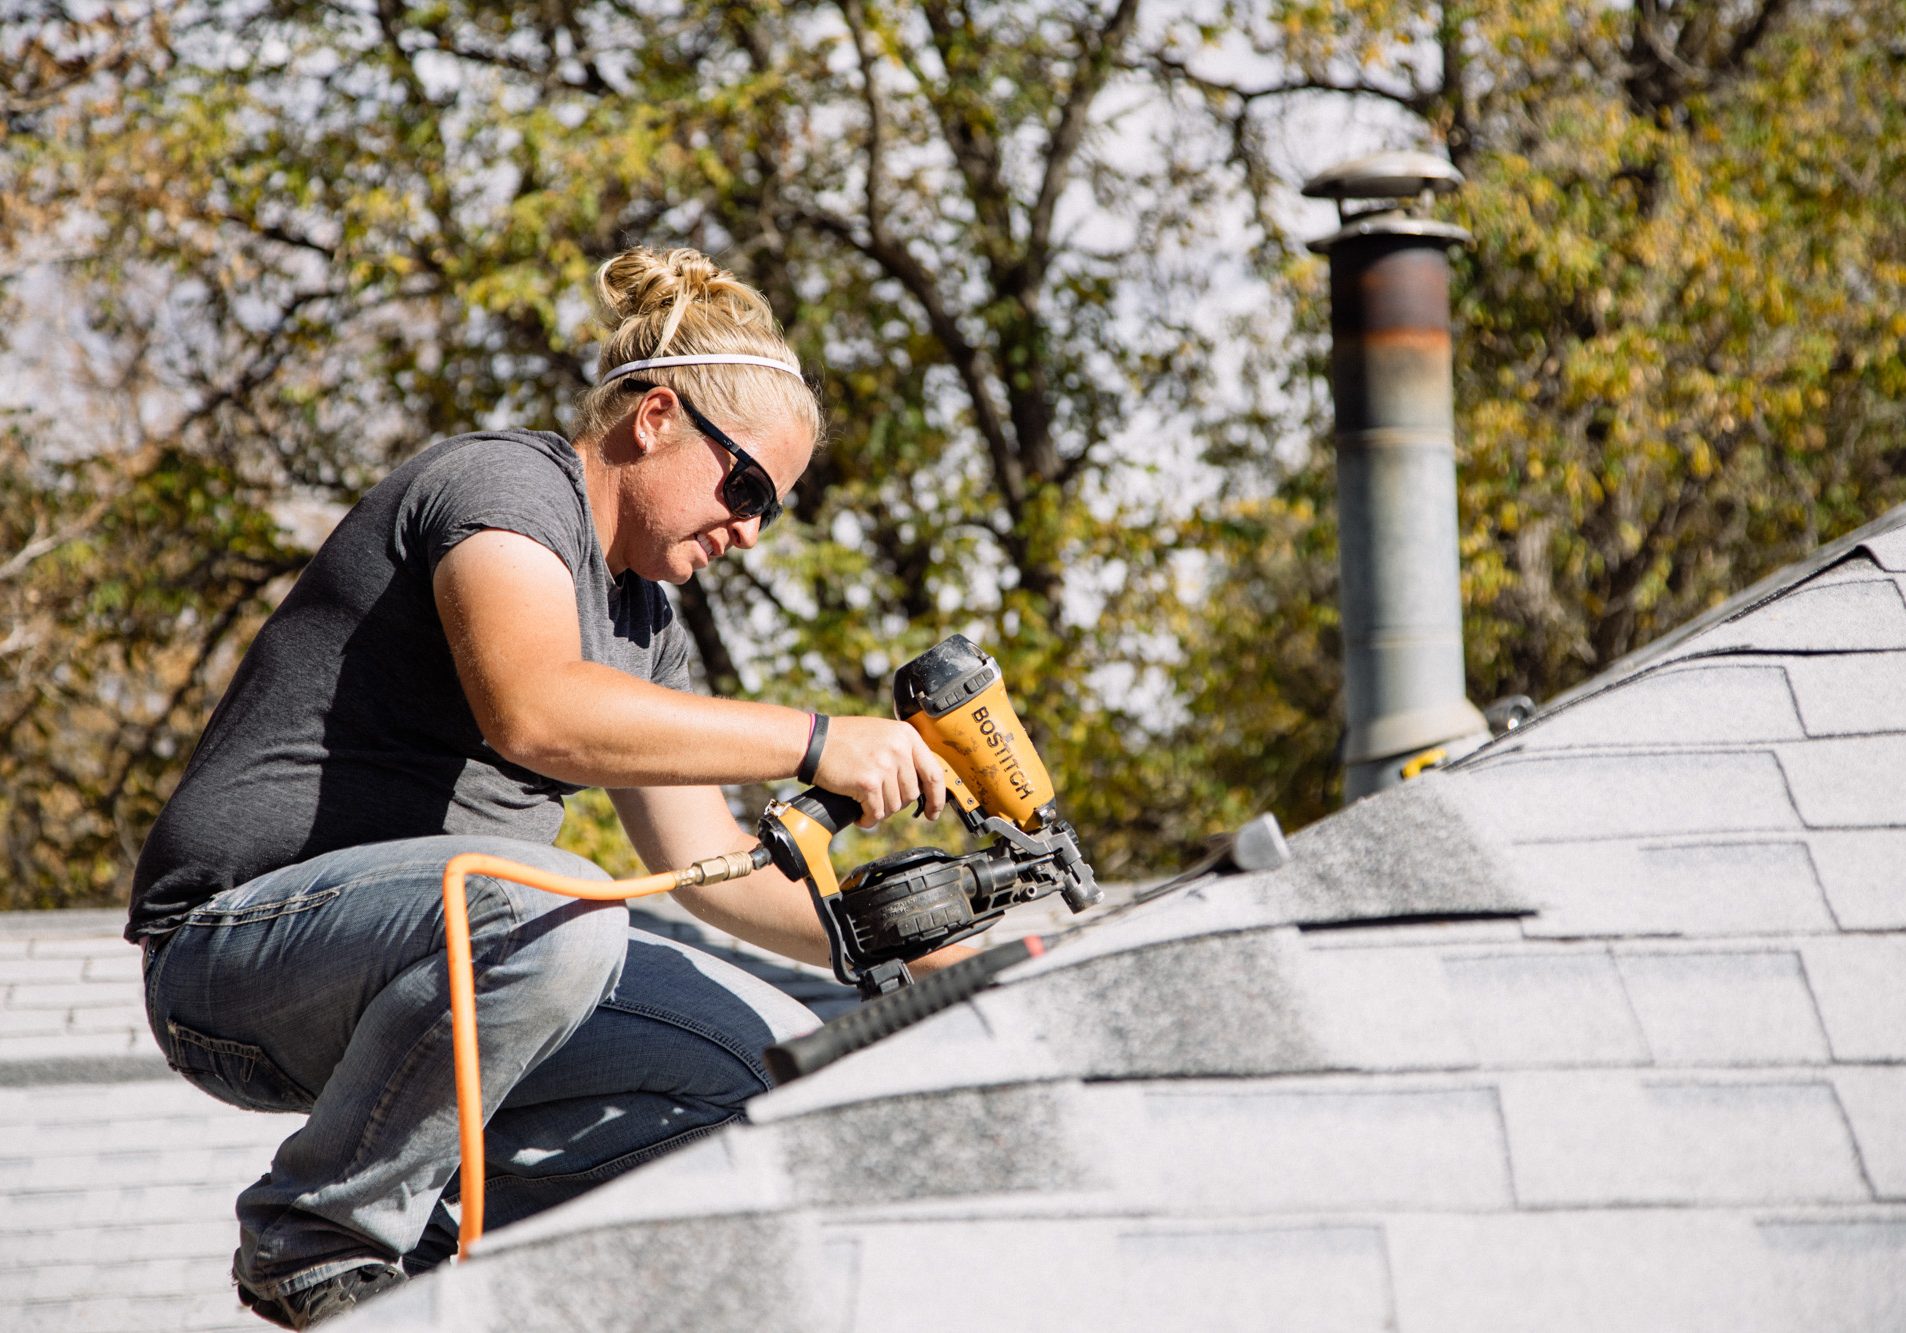 Housing Specialist Steph Crabtree roofing as a part of a Fix It First repair